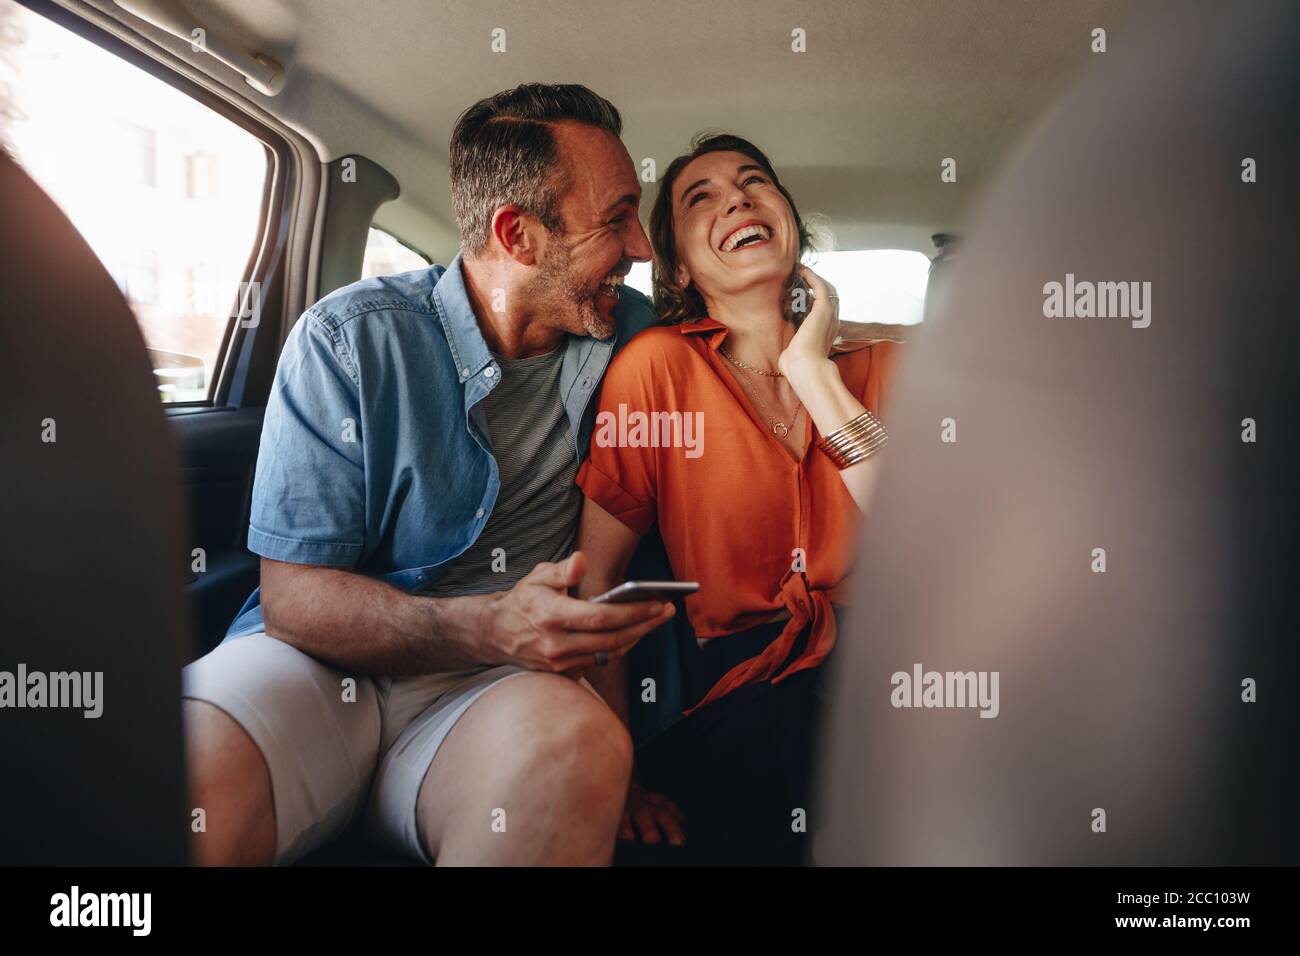 Happy Couple Having Fun In The Backseat Of A Car Man And Woman